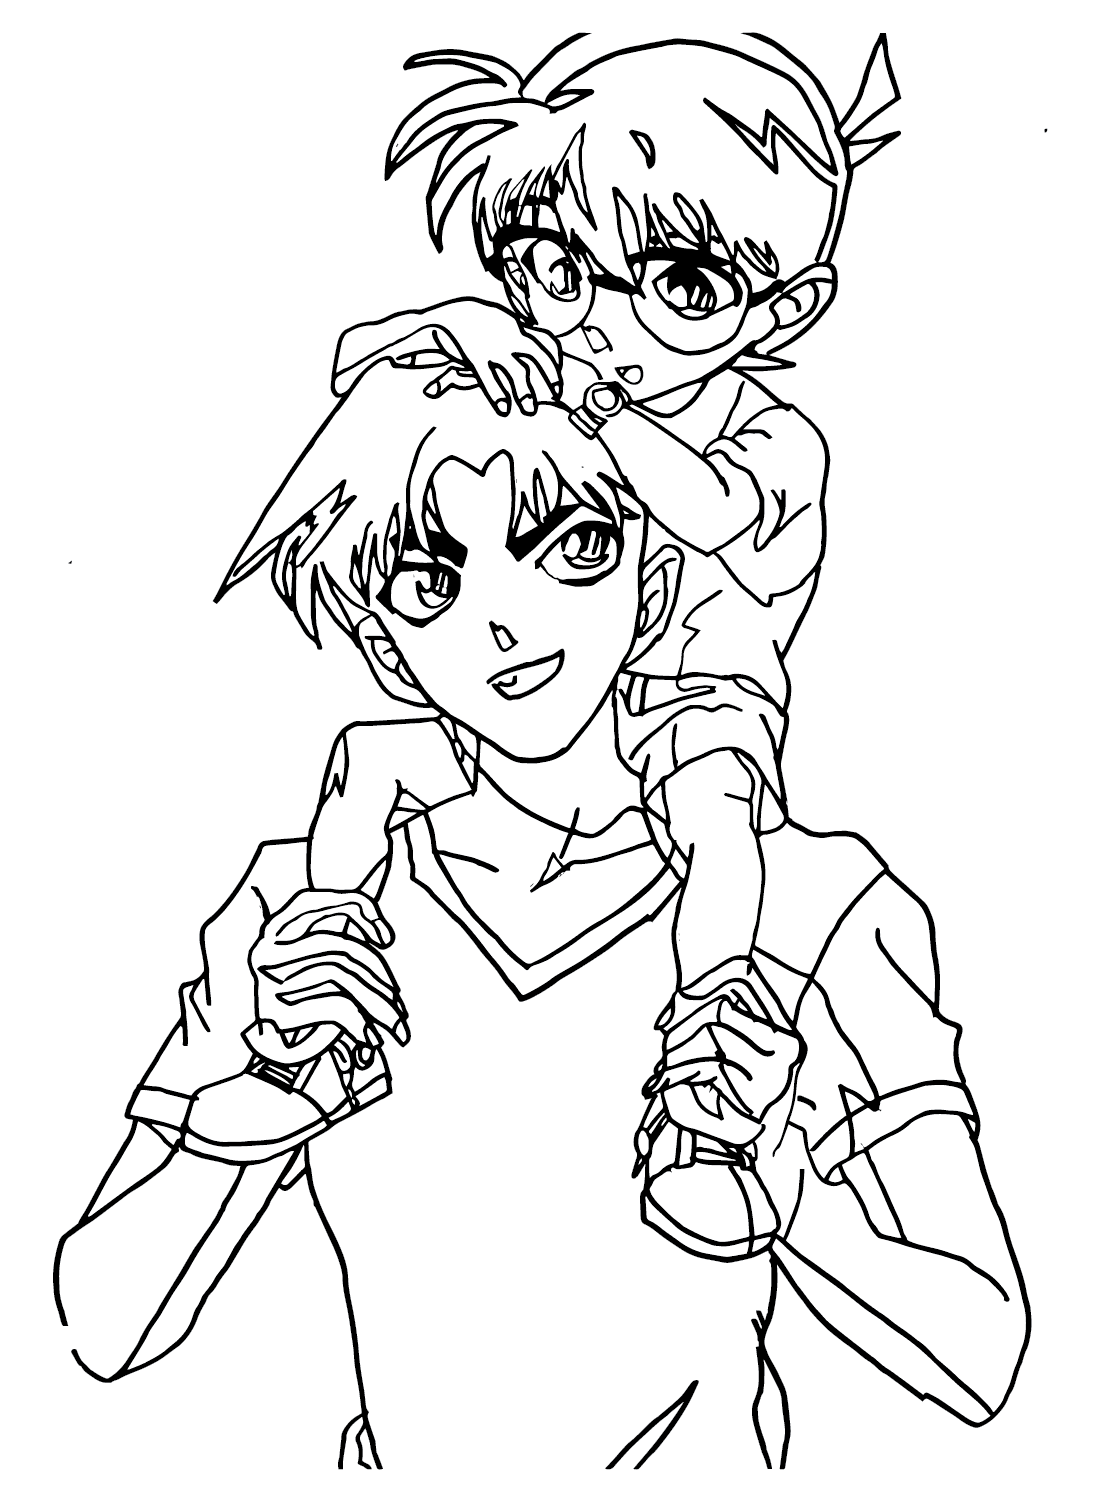 Hattori Heiji and Conan Coloring Page to Print